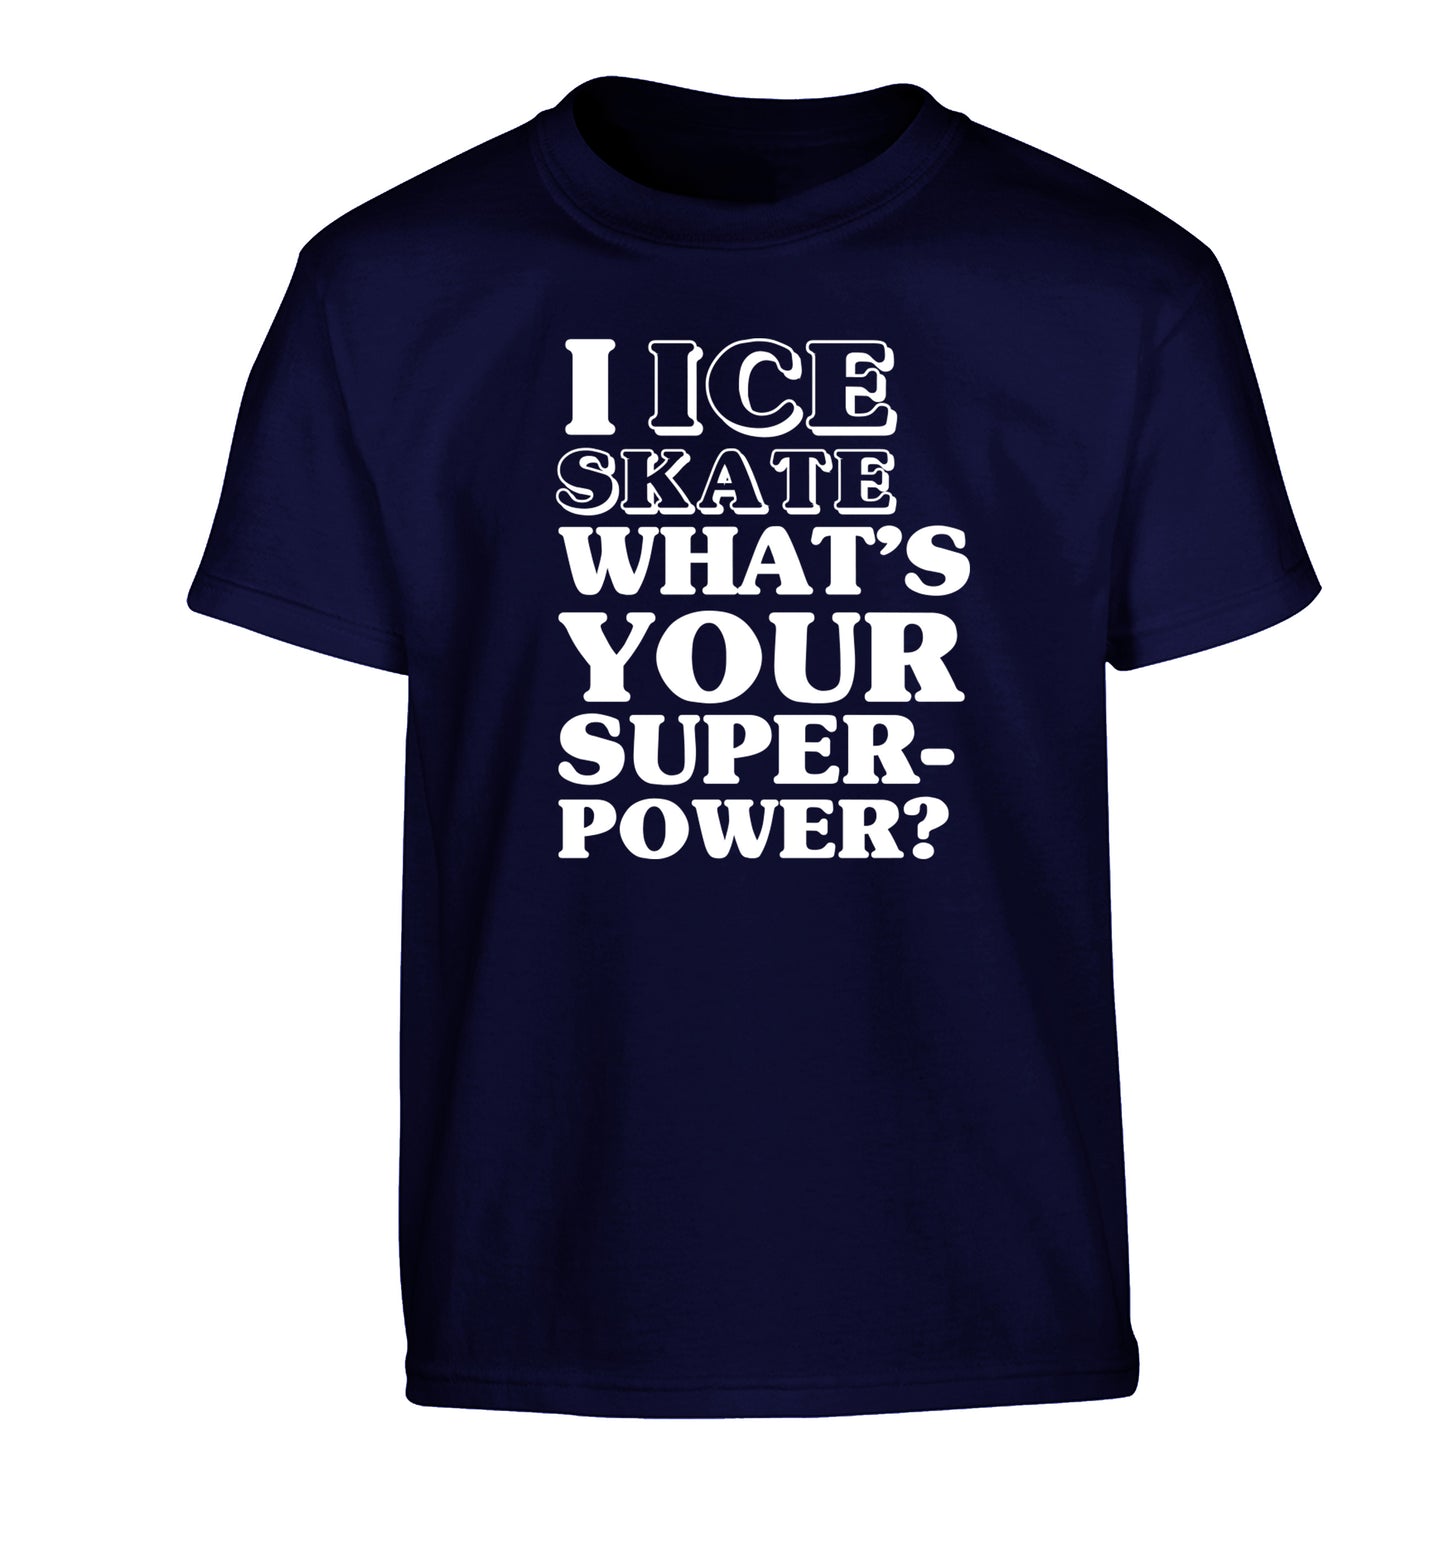 I ice skate what's your superpower? Children's navy Tshirt 12-14 Years